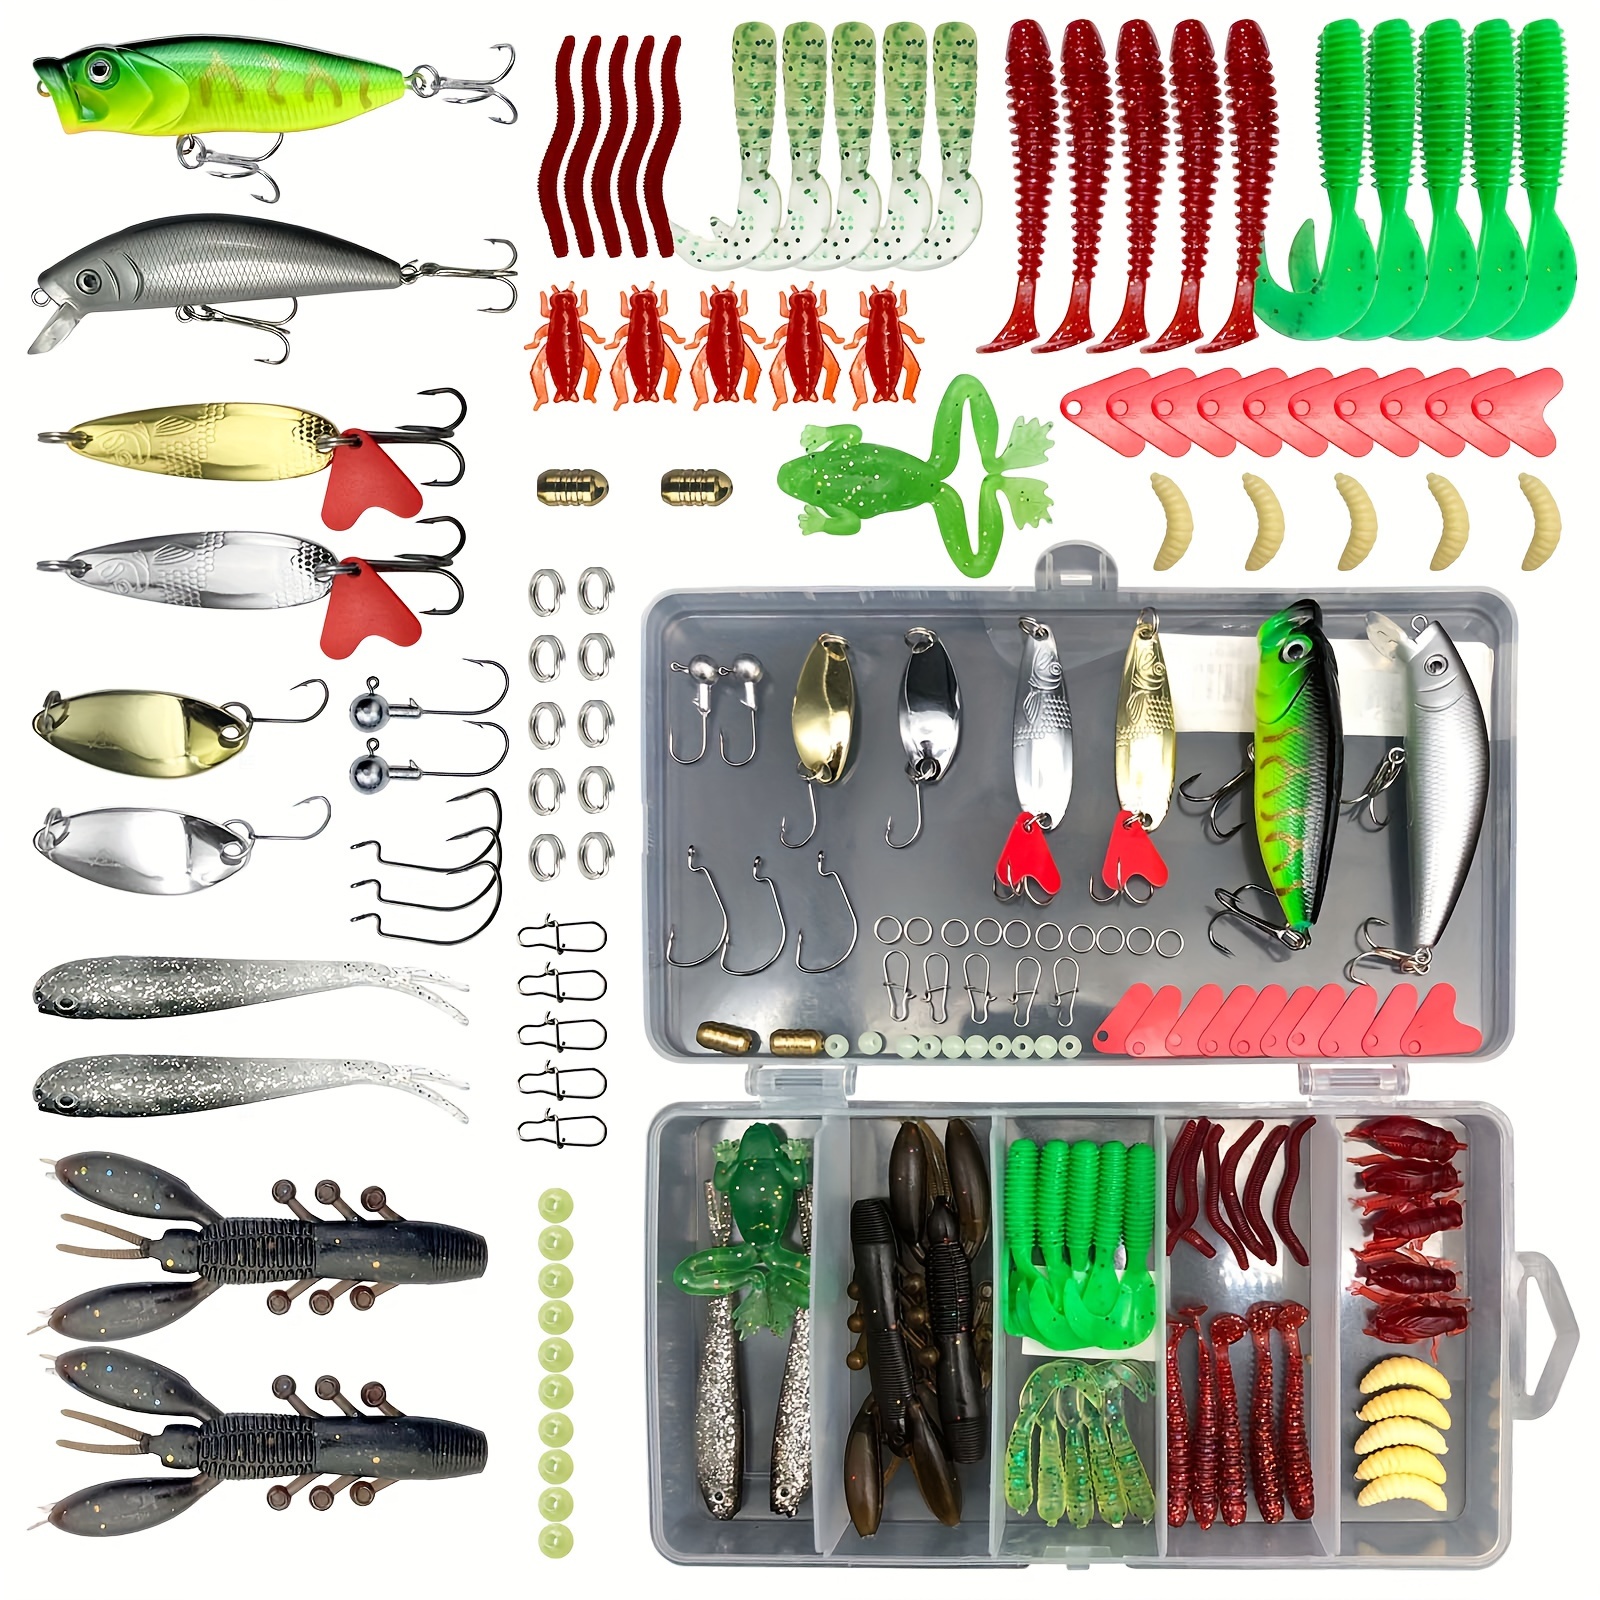 

84/302pcs Fishing Lures Kit For Freshwater, Tackle Kit For Bass Trout Salmon, Fishing Accessories Including Spoon Lures, Soft Plastic Worms, Crankbait Jigs, Fishing Hooks